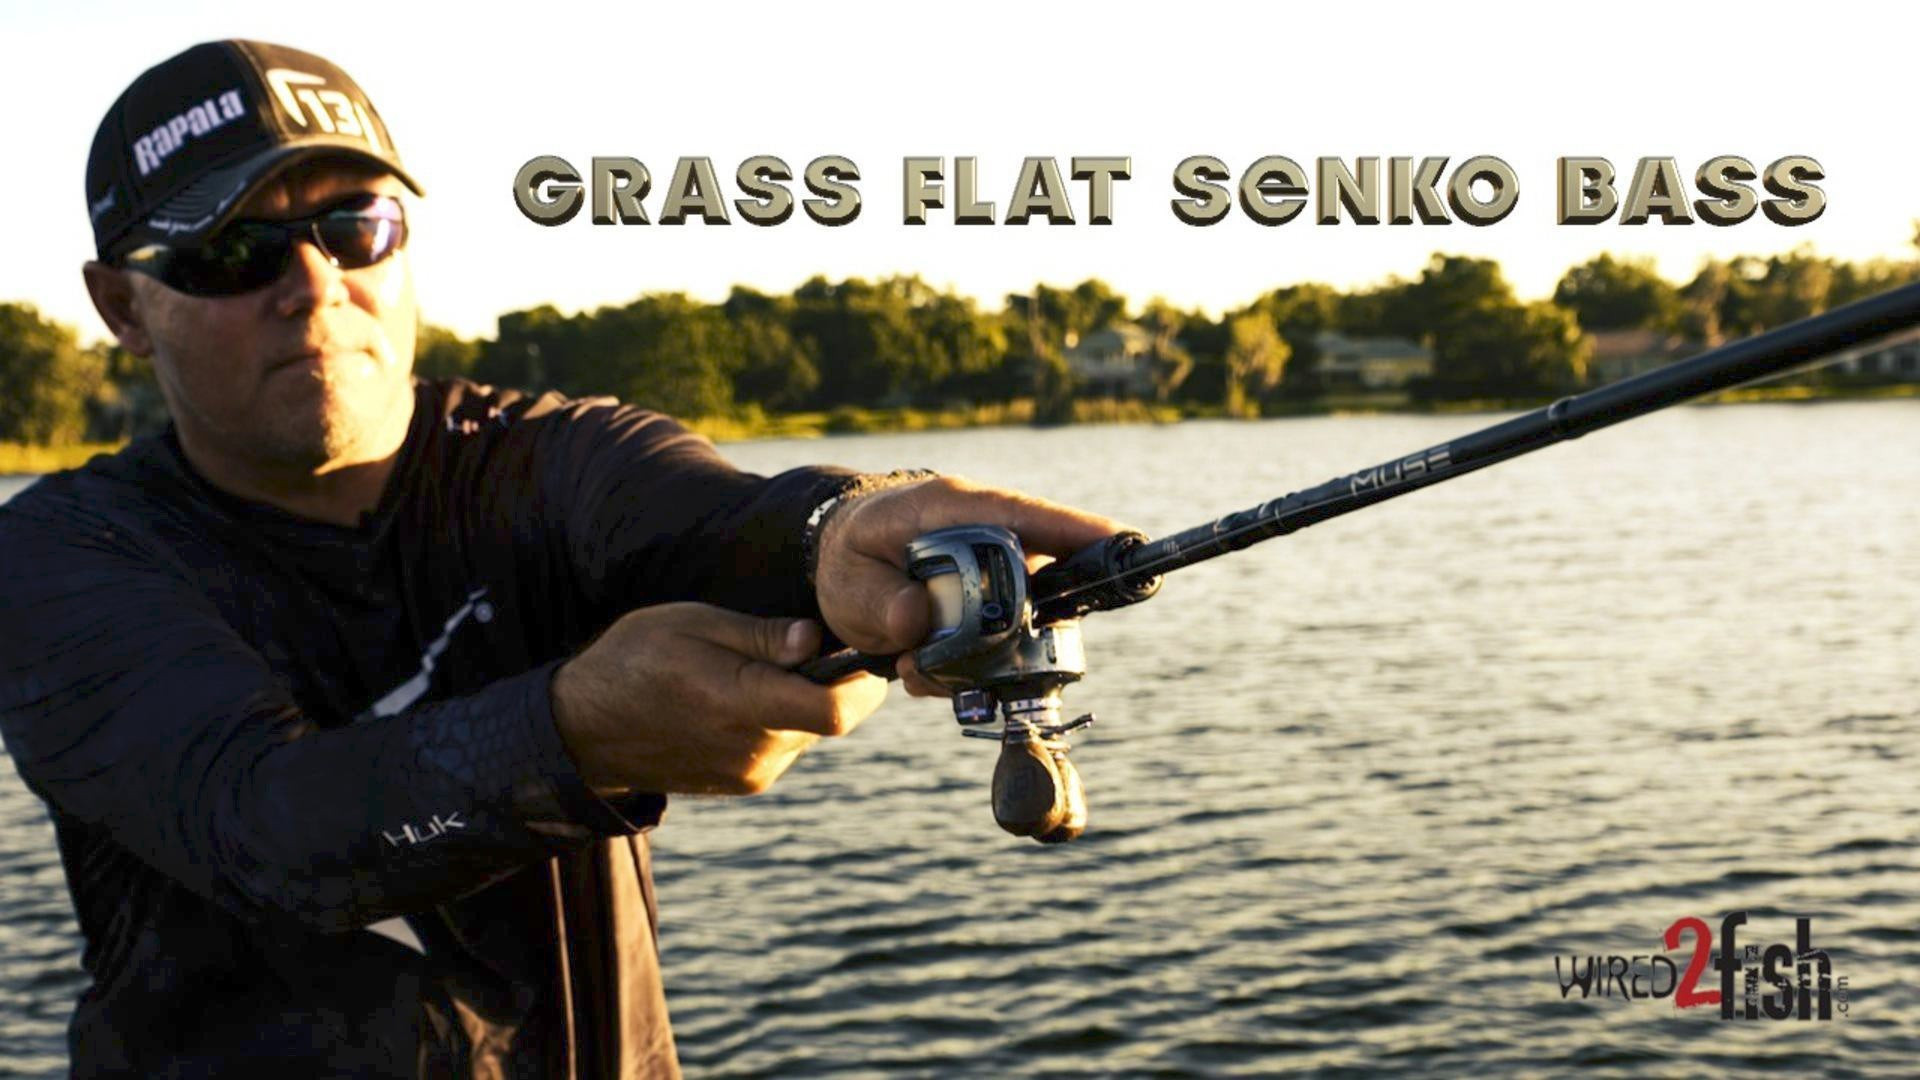 2-Pronged Senko System for Grass Flat Bass - Wired2Fish